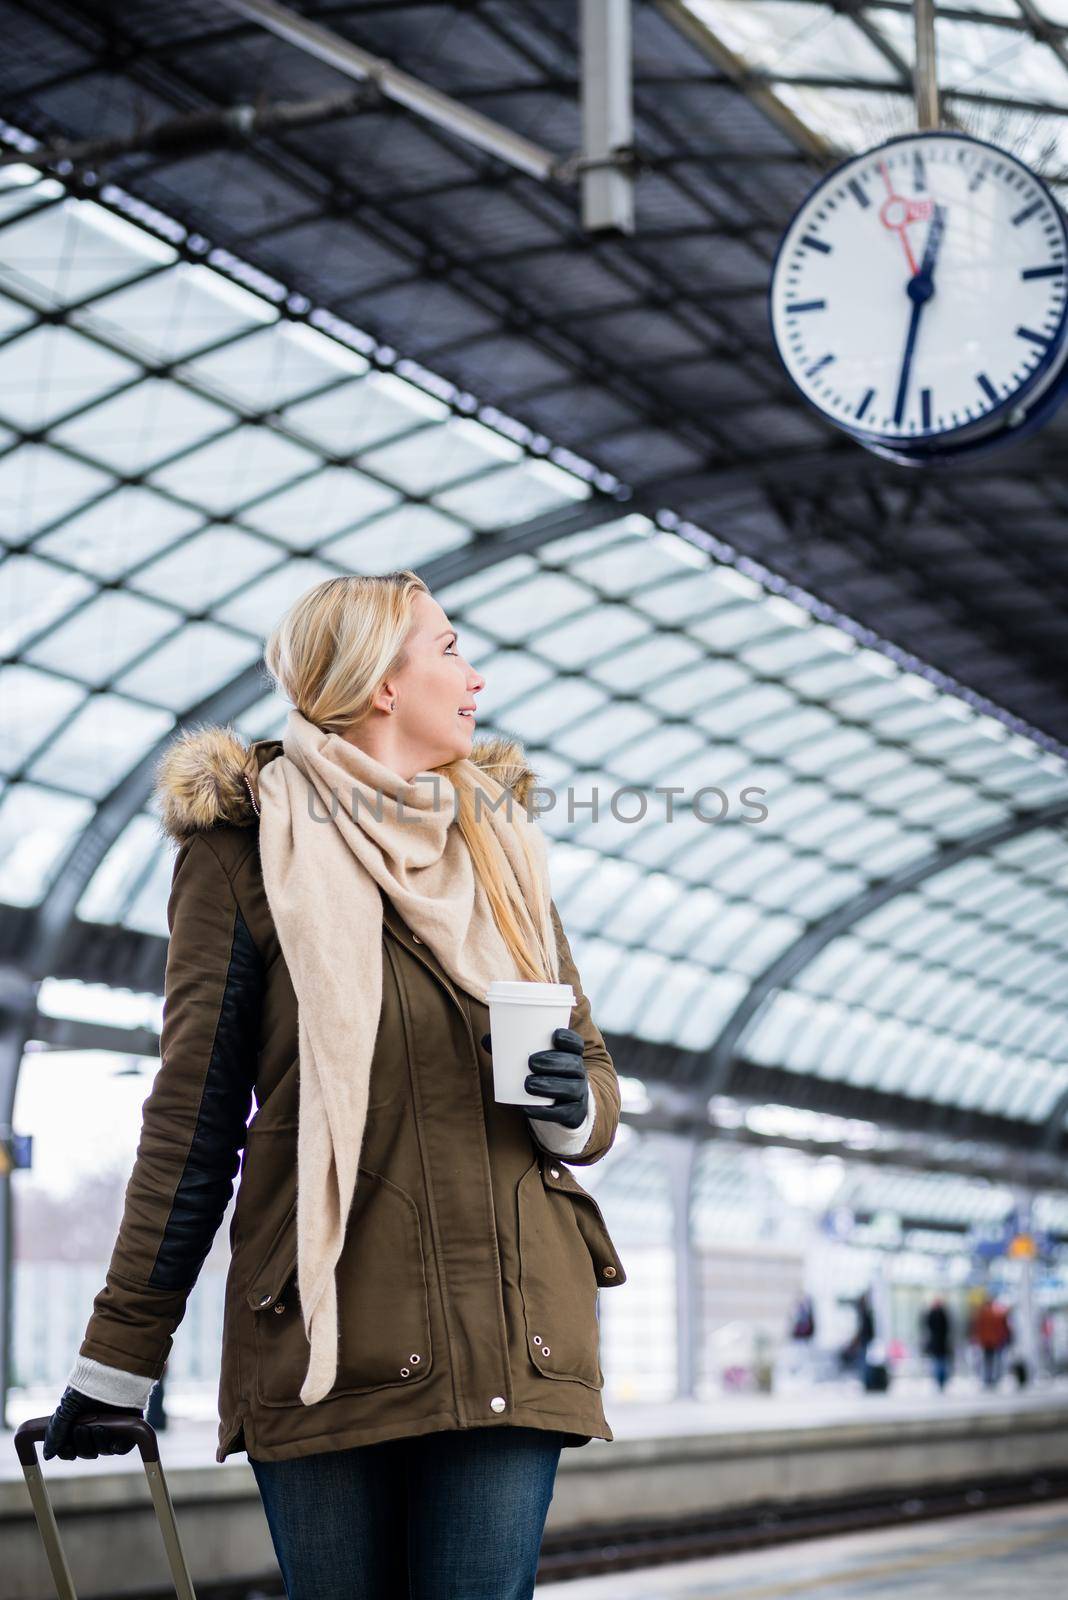 Woman looking at clock in train station as her train has a delay by Kzenon